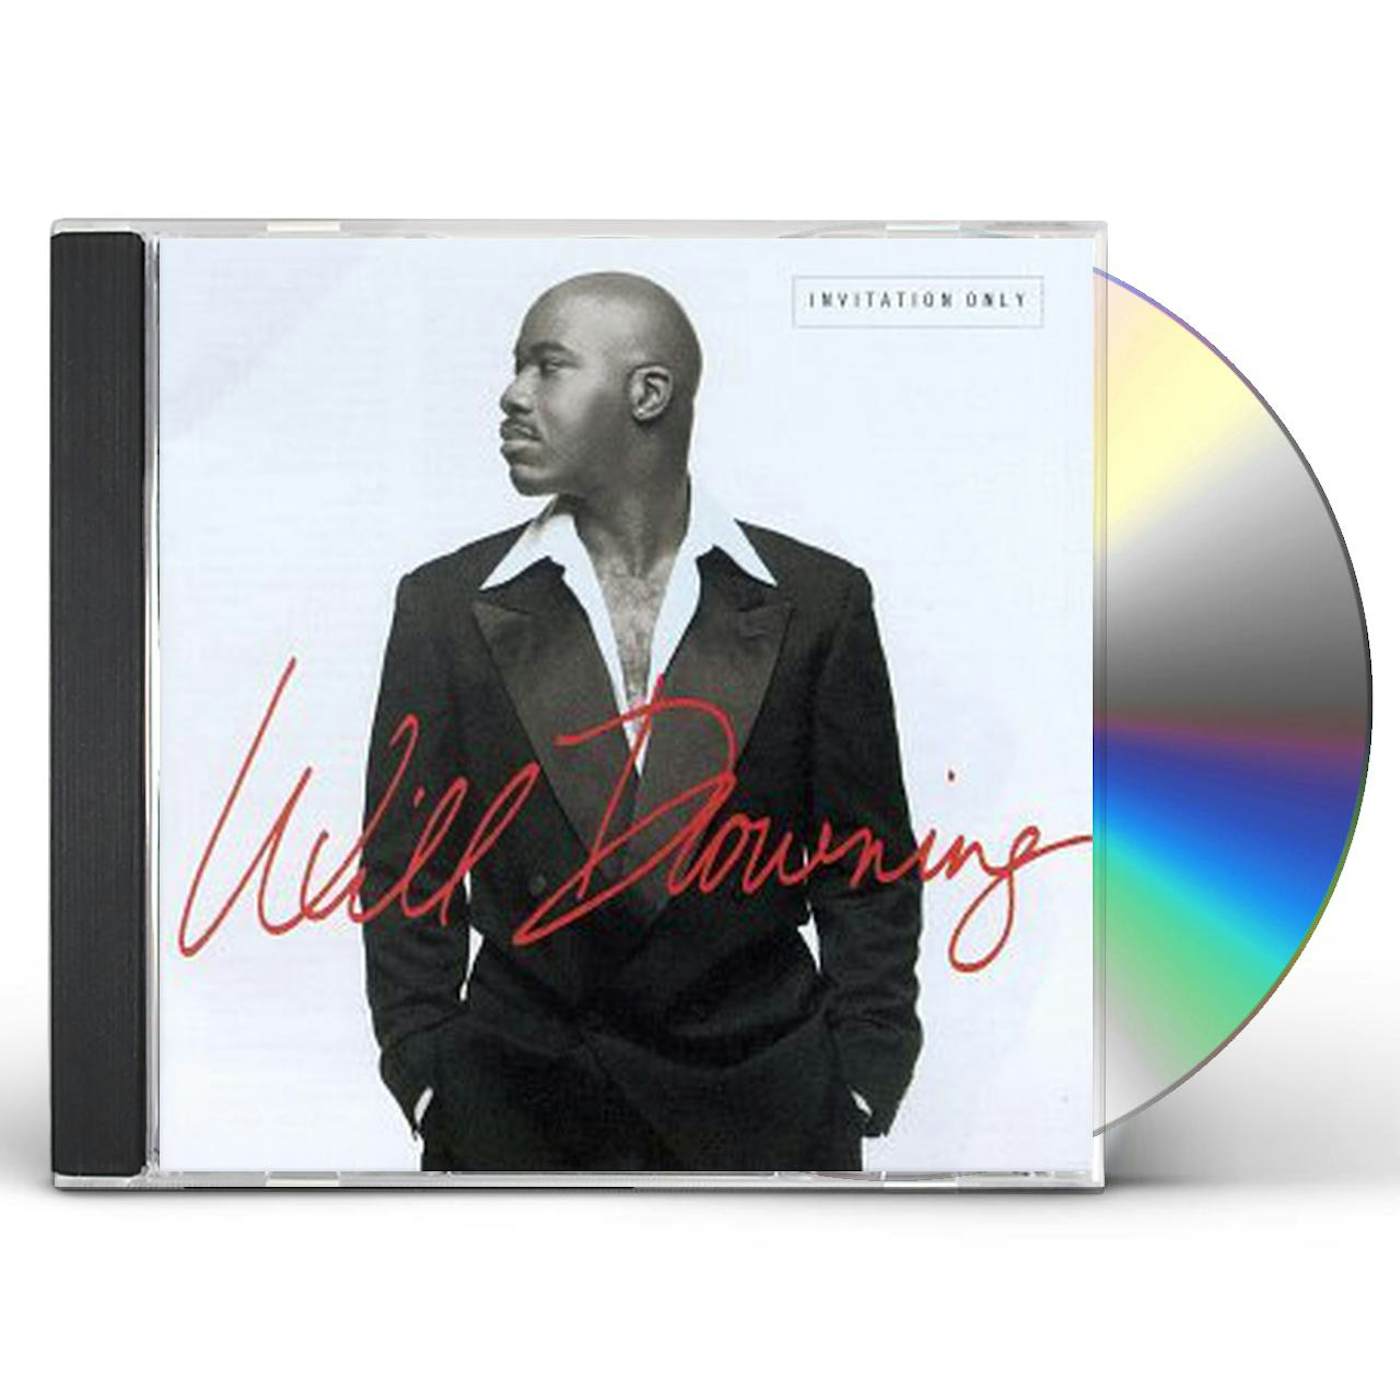 Will Downing INVITATION ONLY CD